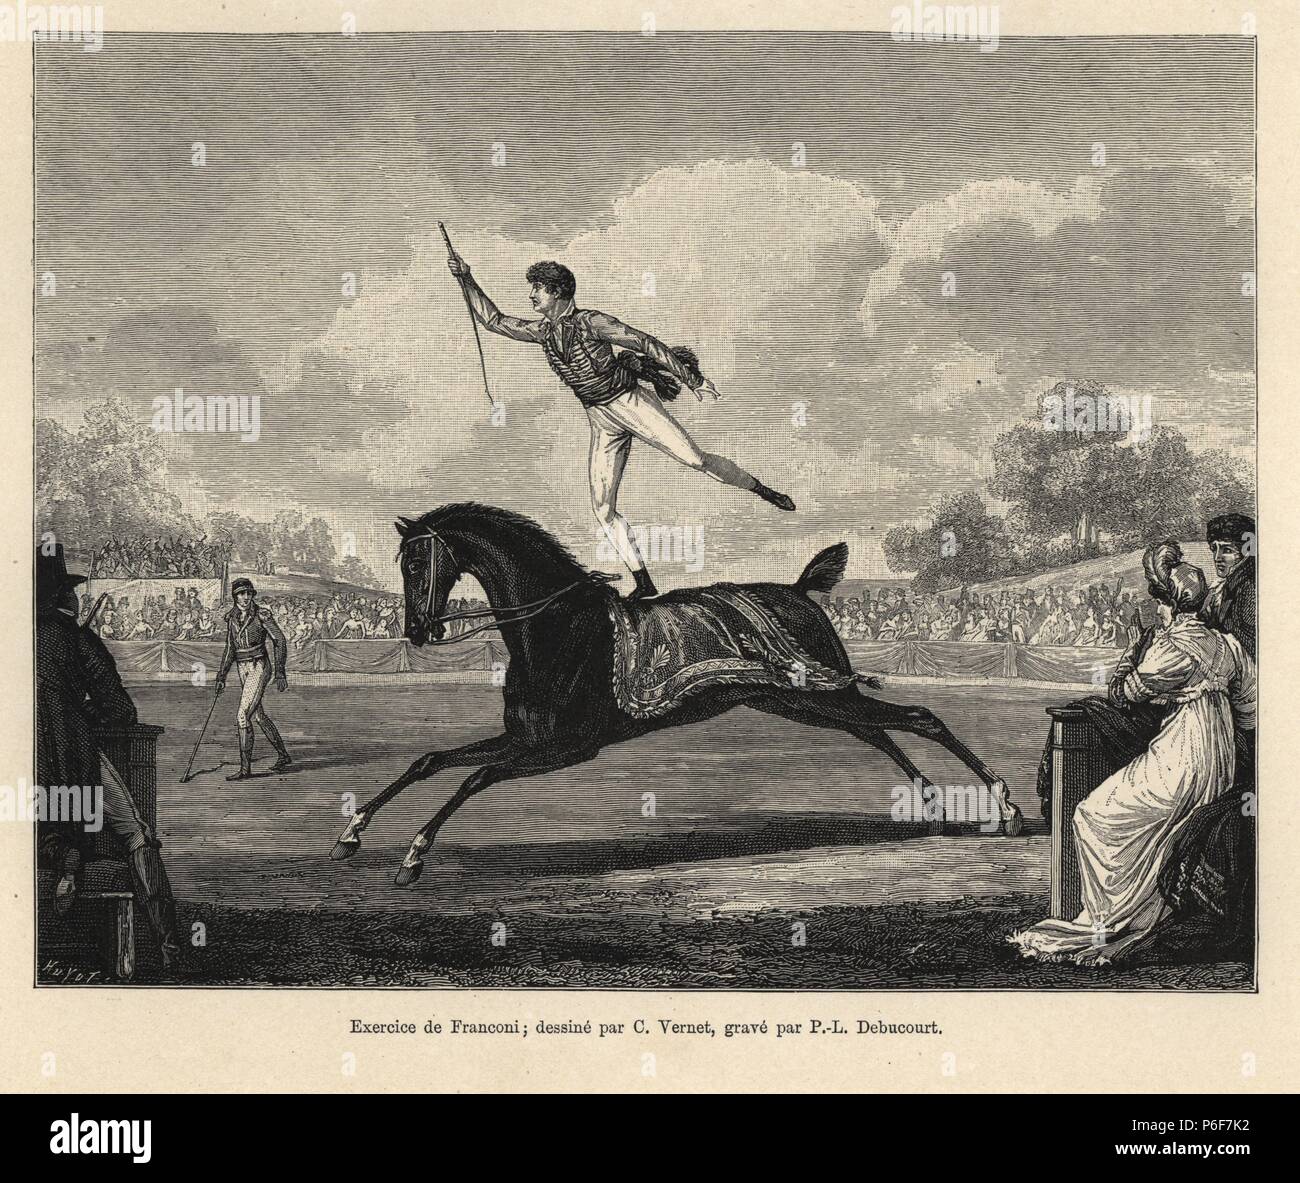 The equestrian acrobat Antonio Franconi standing on a galloping horse, Cirque Olympique in Paris, circa 1800. Drawn by Carle Vernet, woodcut by Huyot from Paul Lacroix's 'Directoire, Consulat et Empire,' Paris, 1884. Stock Photo